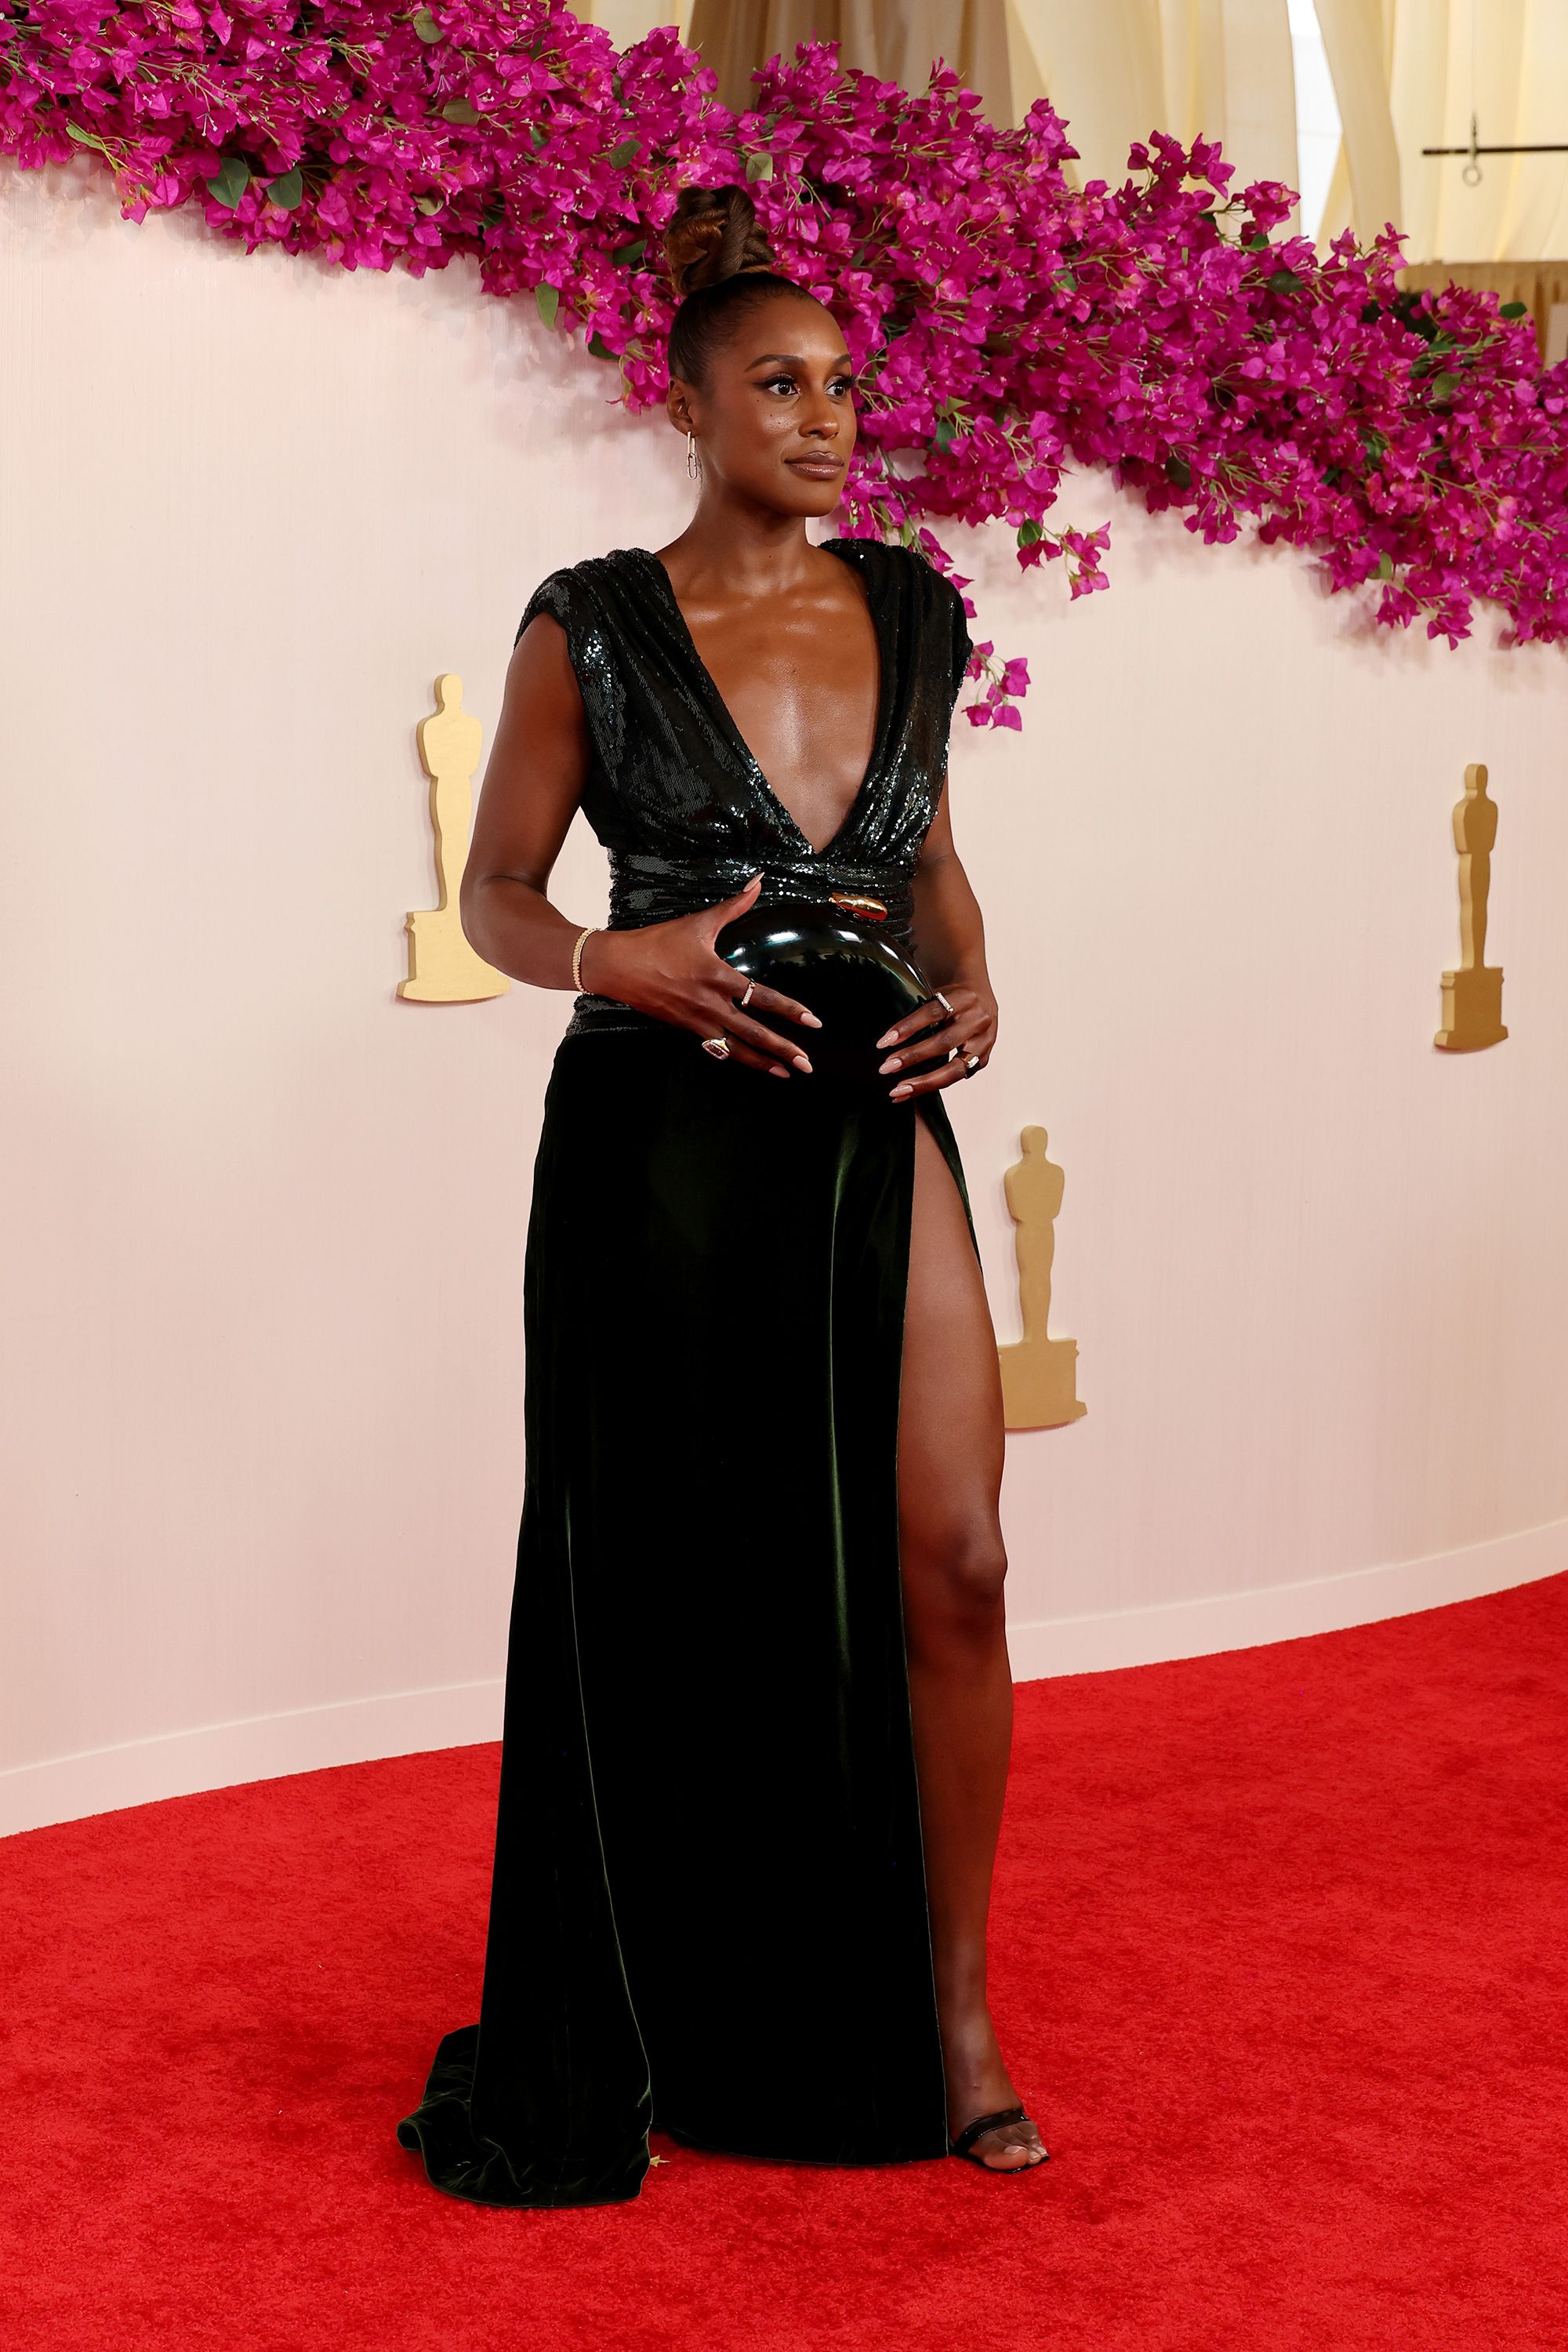 Issa Rae, who featured in two nominated movies ("Barbie" and "American Fiction"), stunned in a plunging AMI Paris dress paired with Gianvito Rossi shoes.